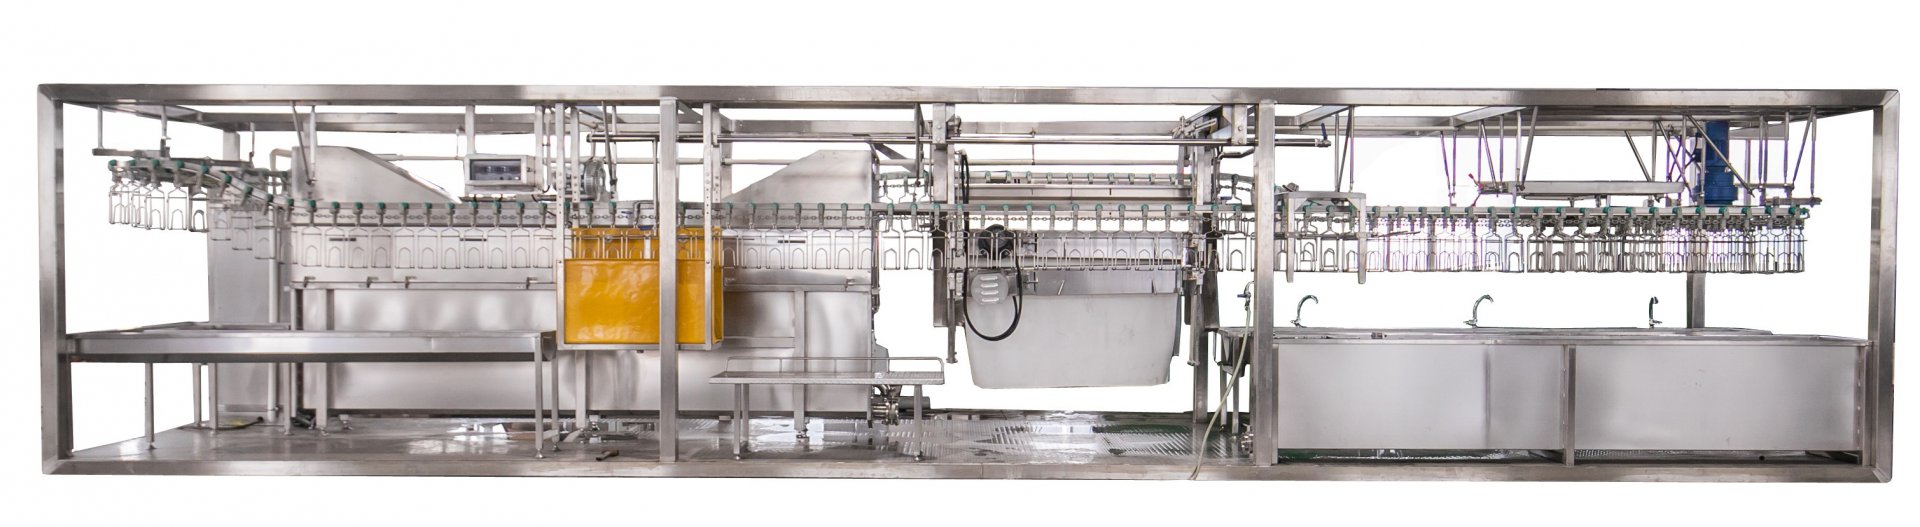 300-800BPH Compact Poultry Slaughter Line 